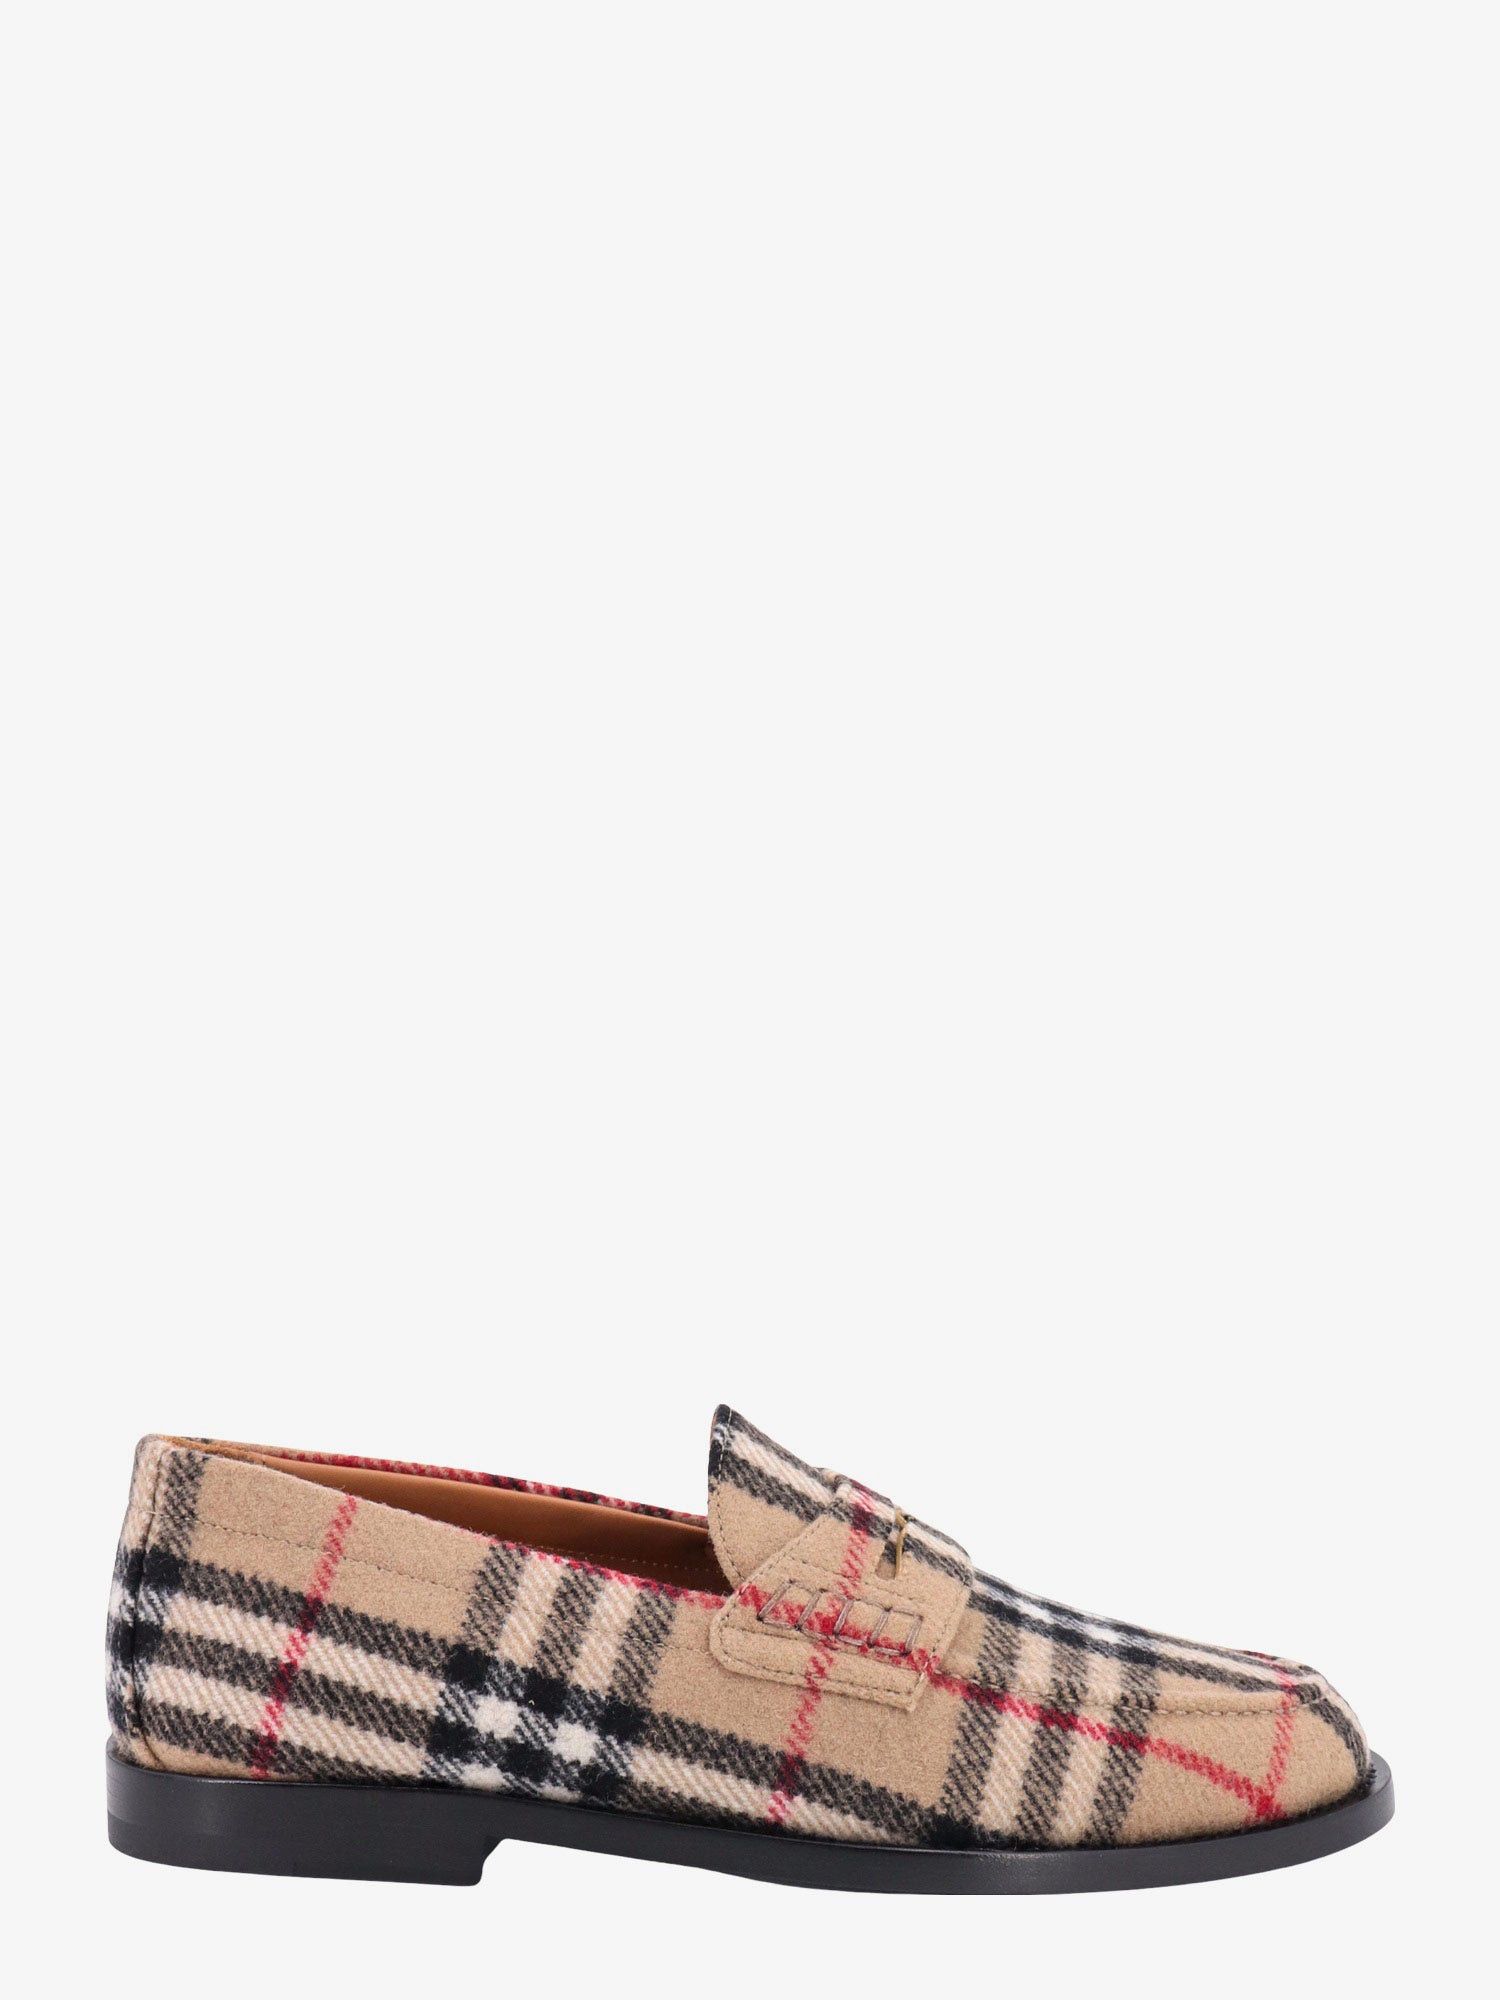 Burberry Loafer Woman Brown Loafers | Grailed